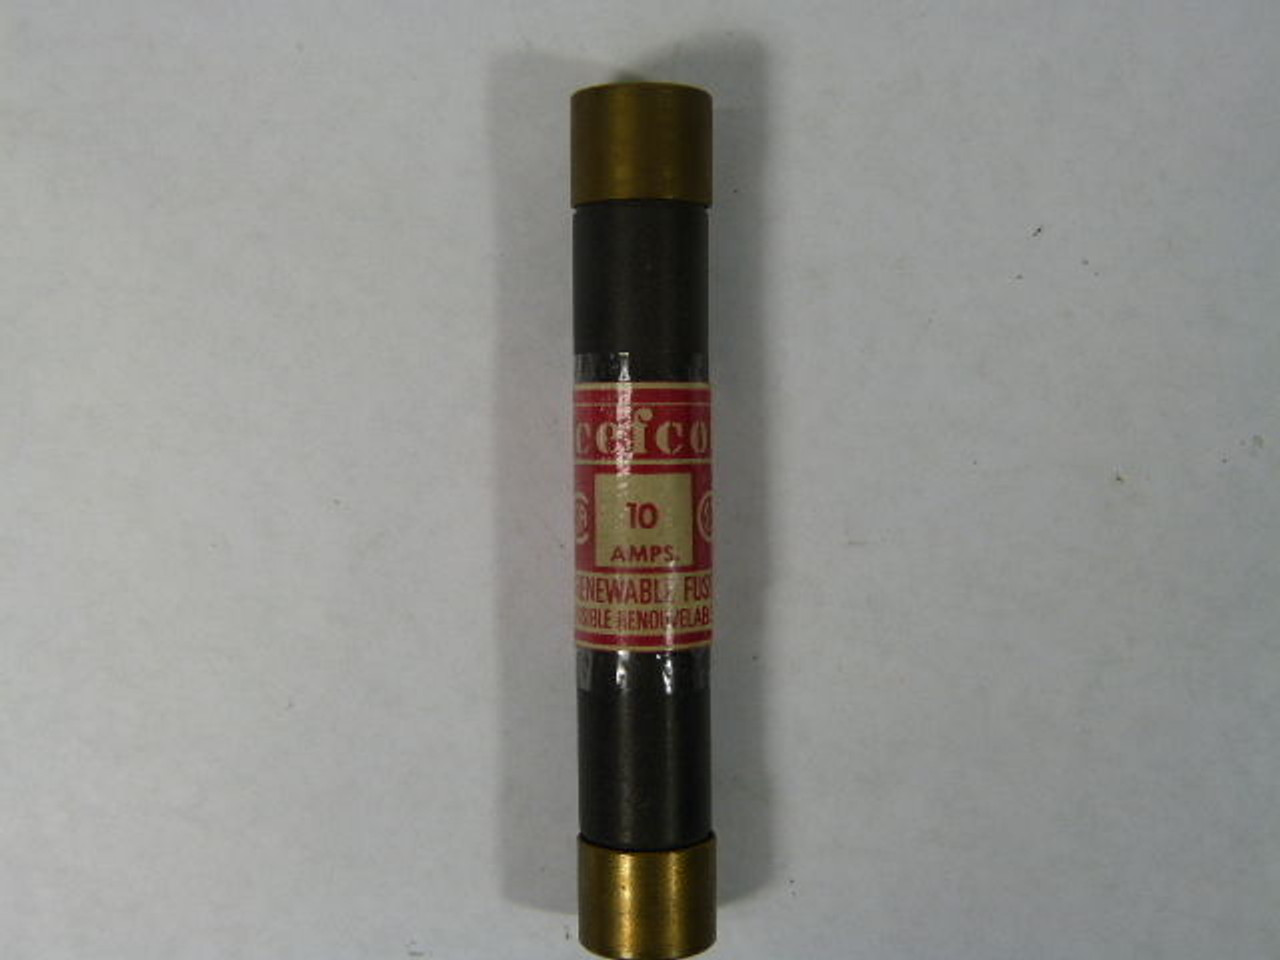 Cefco 10Amp Renewable Fuse 10A 600V USED